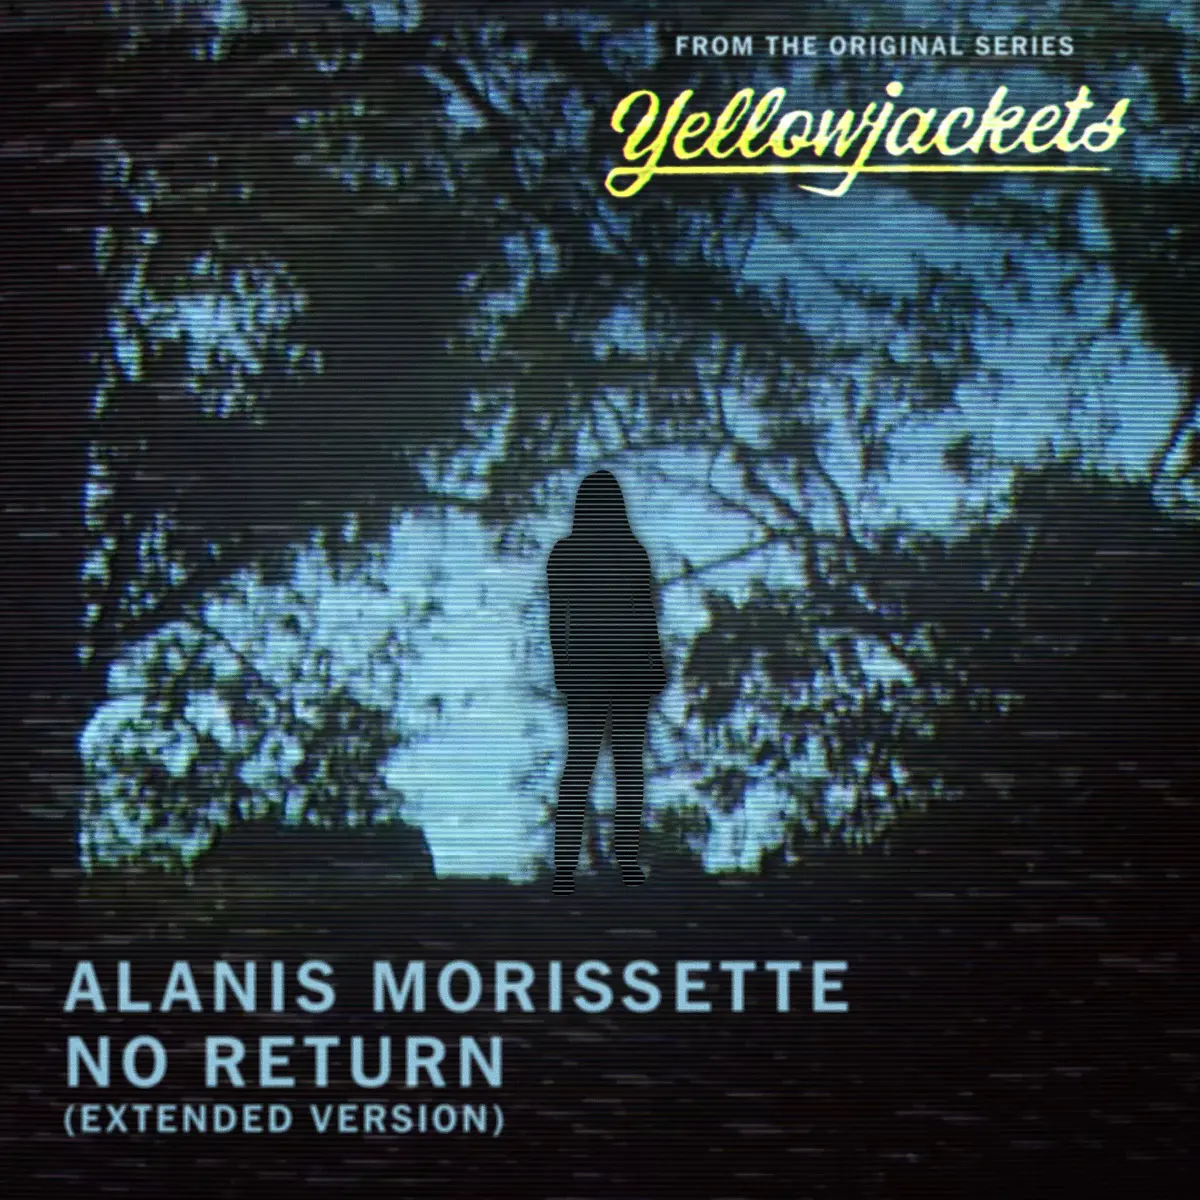 Alanis Morissette Releases New Version of the Main Theme Song "No Return" (Extended Version)